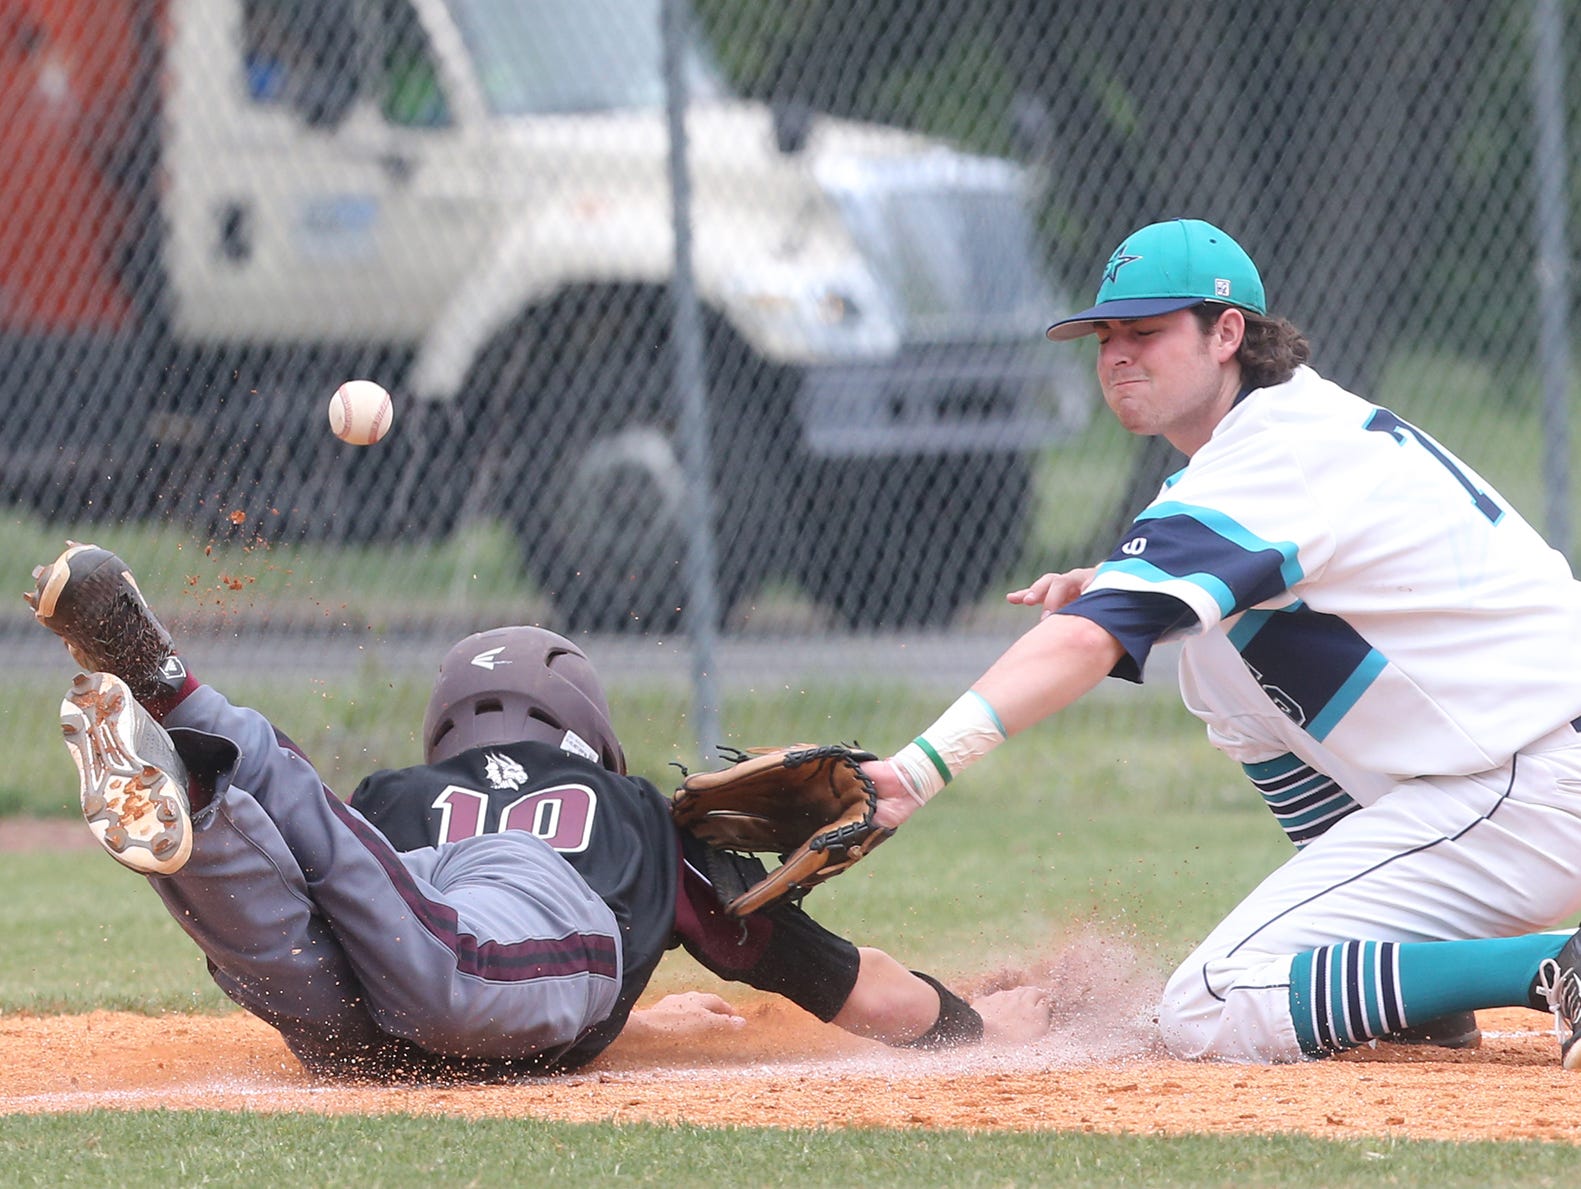 Siegel's Jordan Middleton (7) tries to tag out Collierville's Peyton Cathey (10) after Cathey took a lead off third base during Wednesday's Class AAA state tournament.